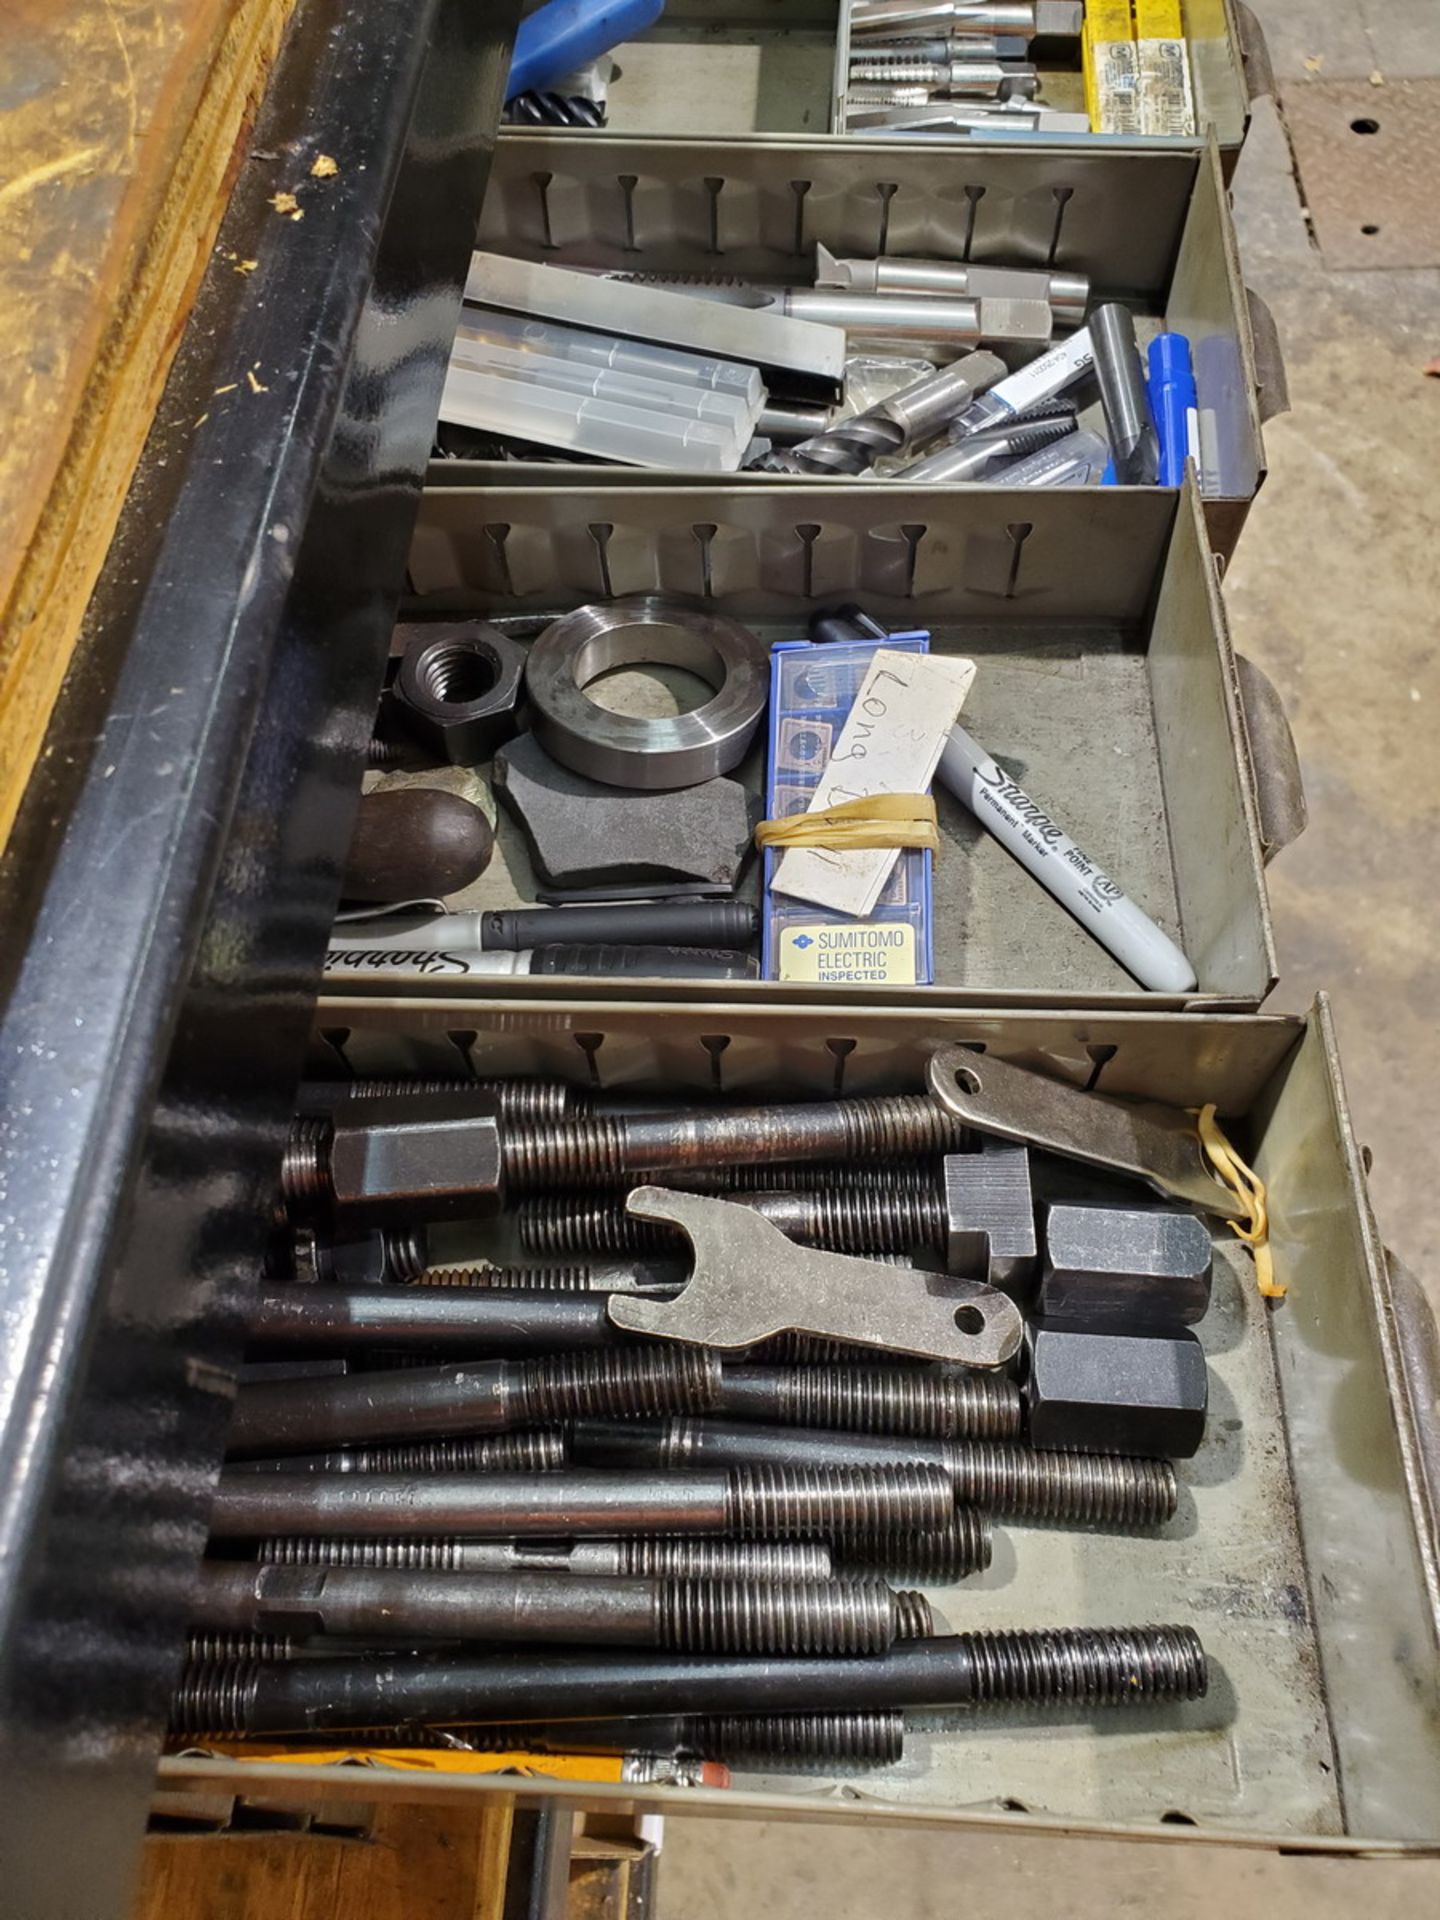 Assorted Matl. To Include But Not Limited To: Drill bits, Carbide Inserts, W/ Parts Bin, etc. - Image 3 of 13